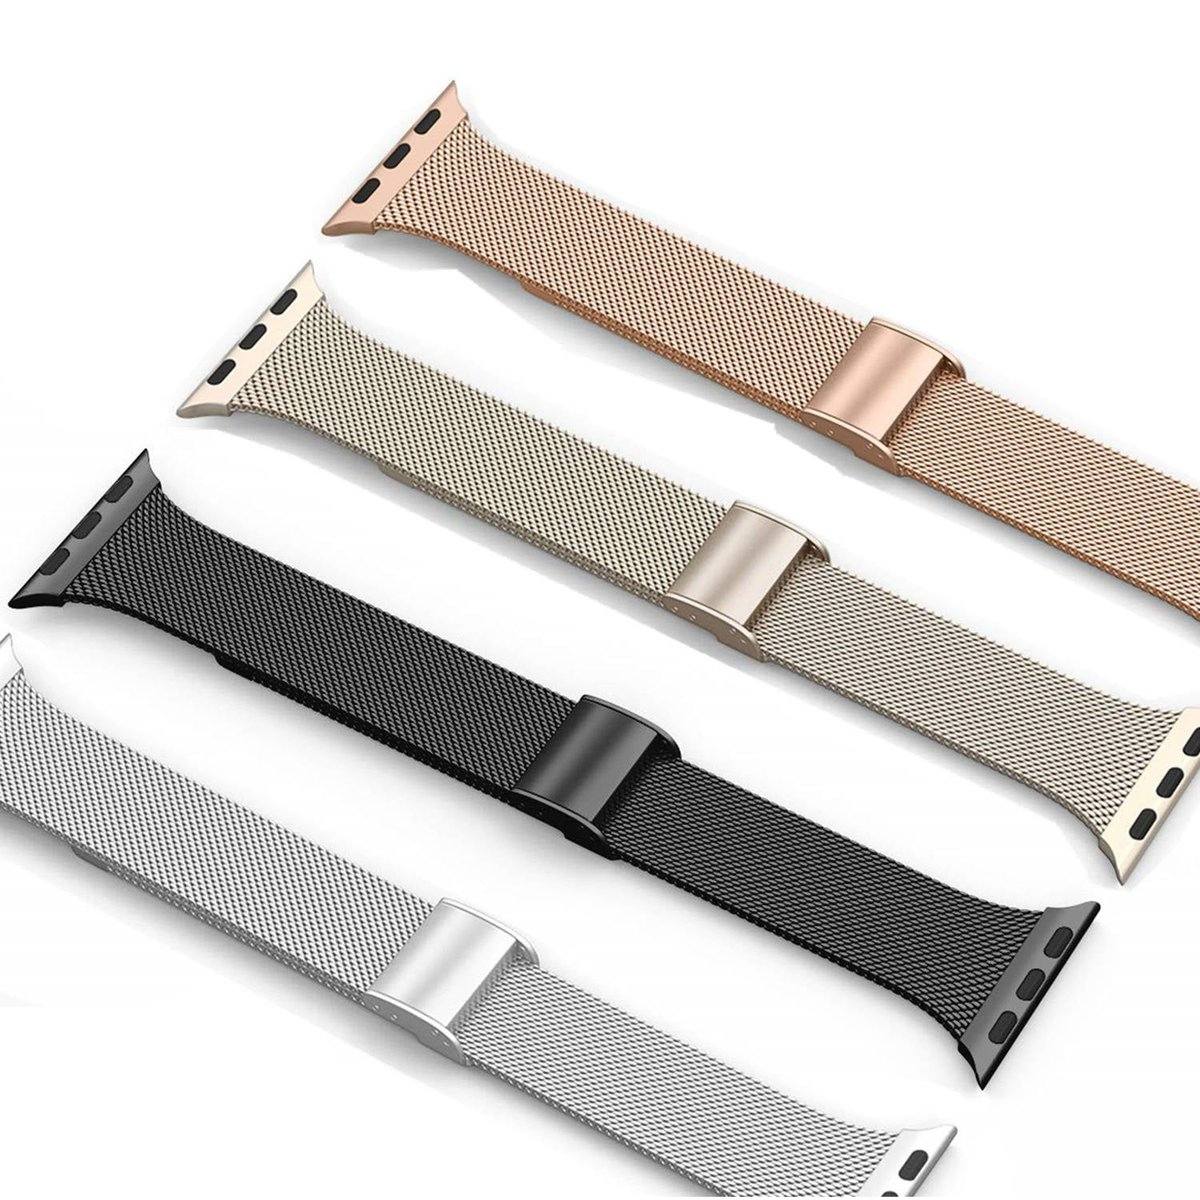 Stainless Steel Mesh Strap For Apple Watch - Premium Apple Watch Accessories from Dressmycell.com - Just $25.00! Shop now at Dressmycell.com